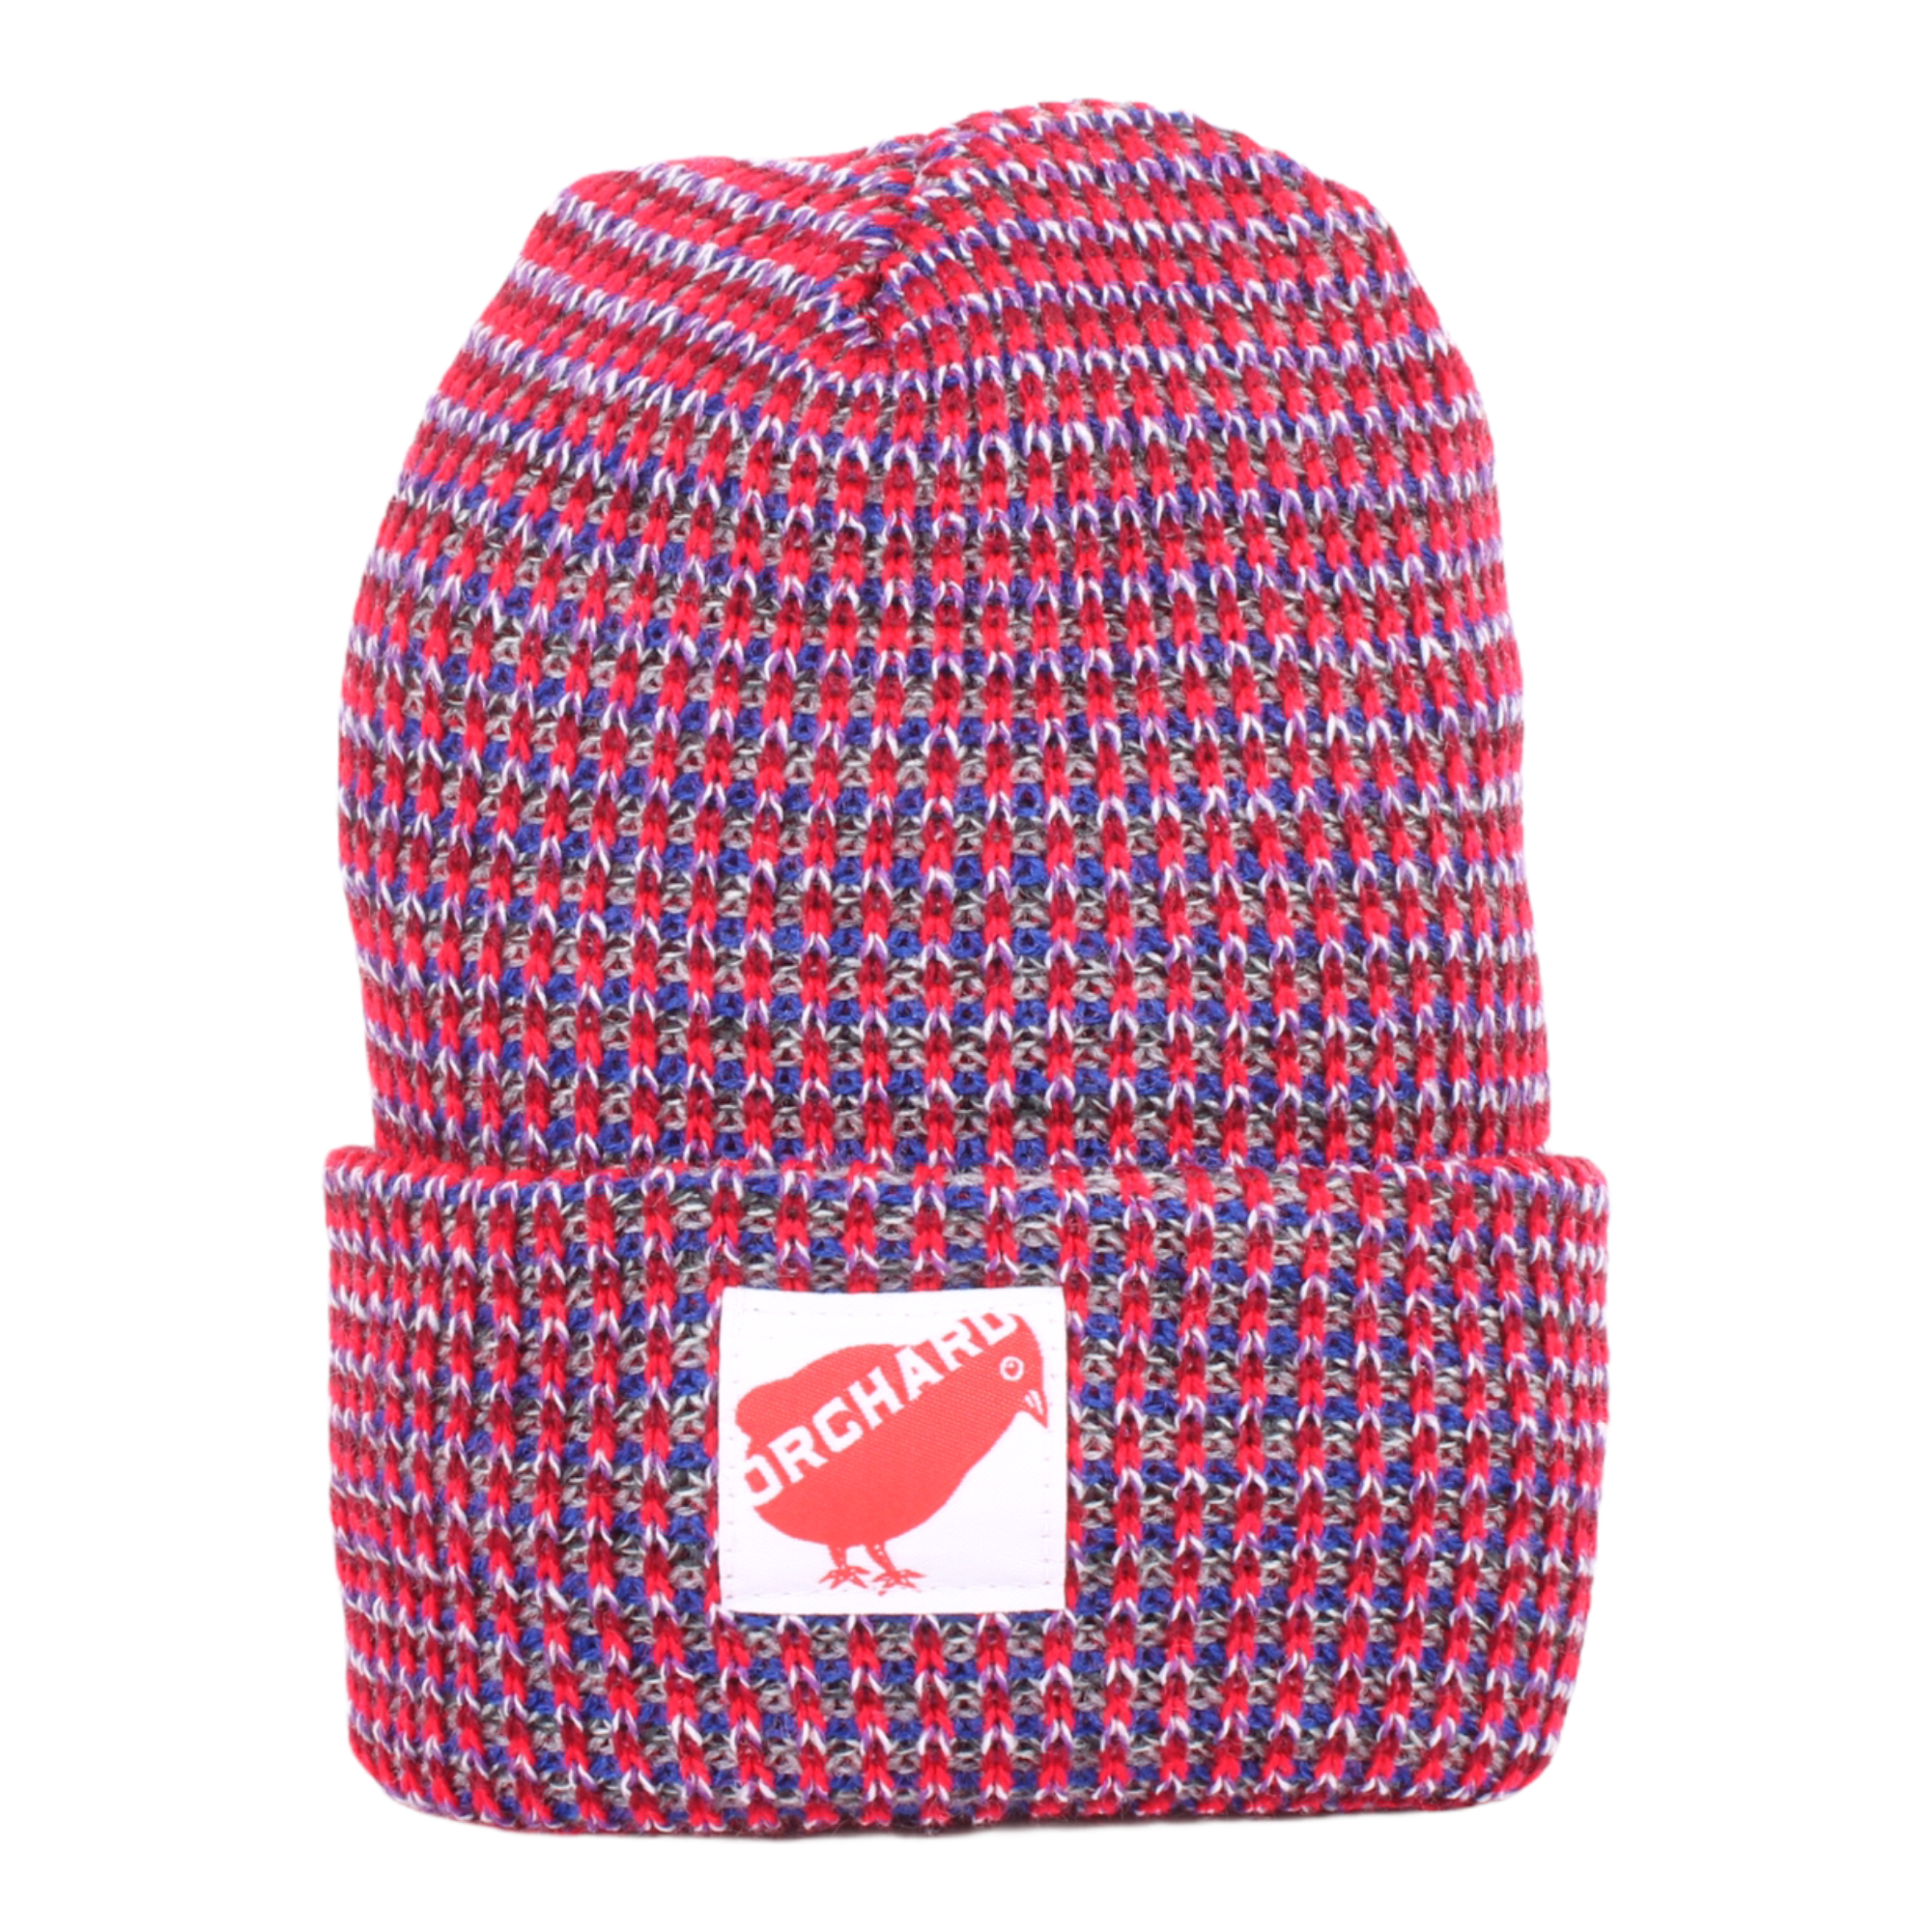 Orchard Red Bird Watch Cap Multi Color Red/Blue/Grey